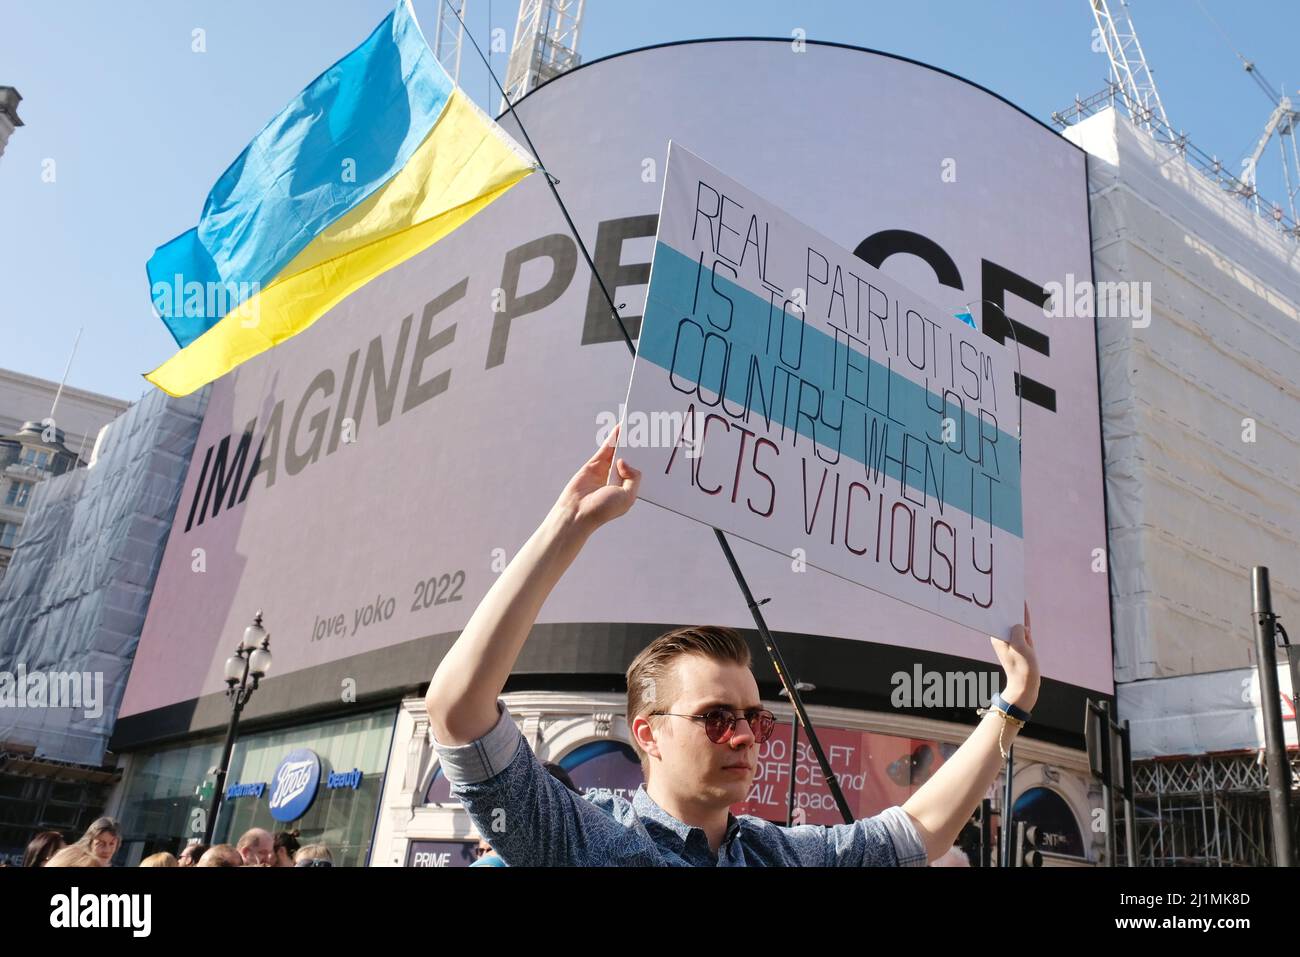 London, UK, 26th Mar, 2022. A man holds up a placard with the anti-war white, blue, white flag design expressing his opinion. He was one of thousands gathered to show solidarity with Ukraine in a march and rally taking place Central London, organised by the European Movement and supported by the Mayor of London. One month after the Russian Invasion Ukrainian president Volodymyr Zelenskyy urged global protests to bring the war to an end. Credit: Eleventh Hour Photography/Alamy Live News Stock Photo